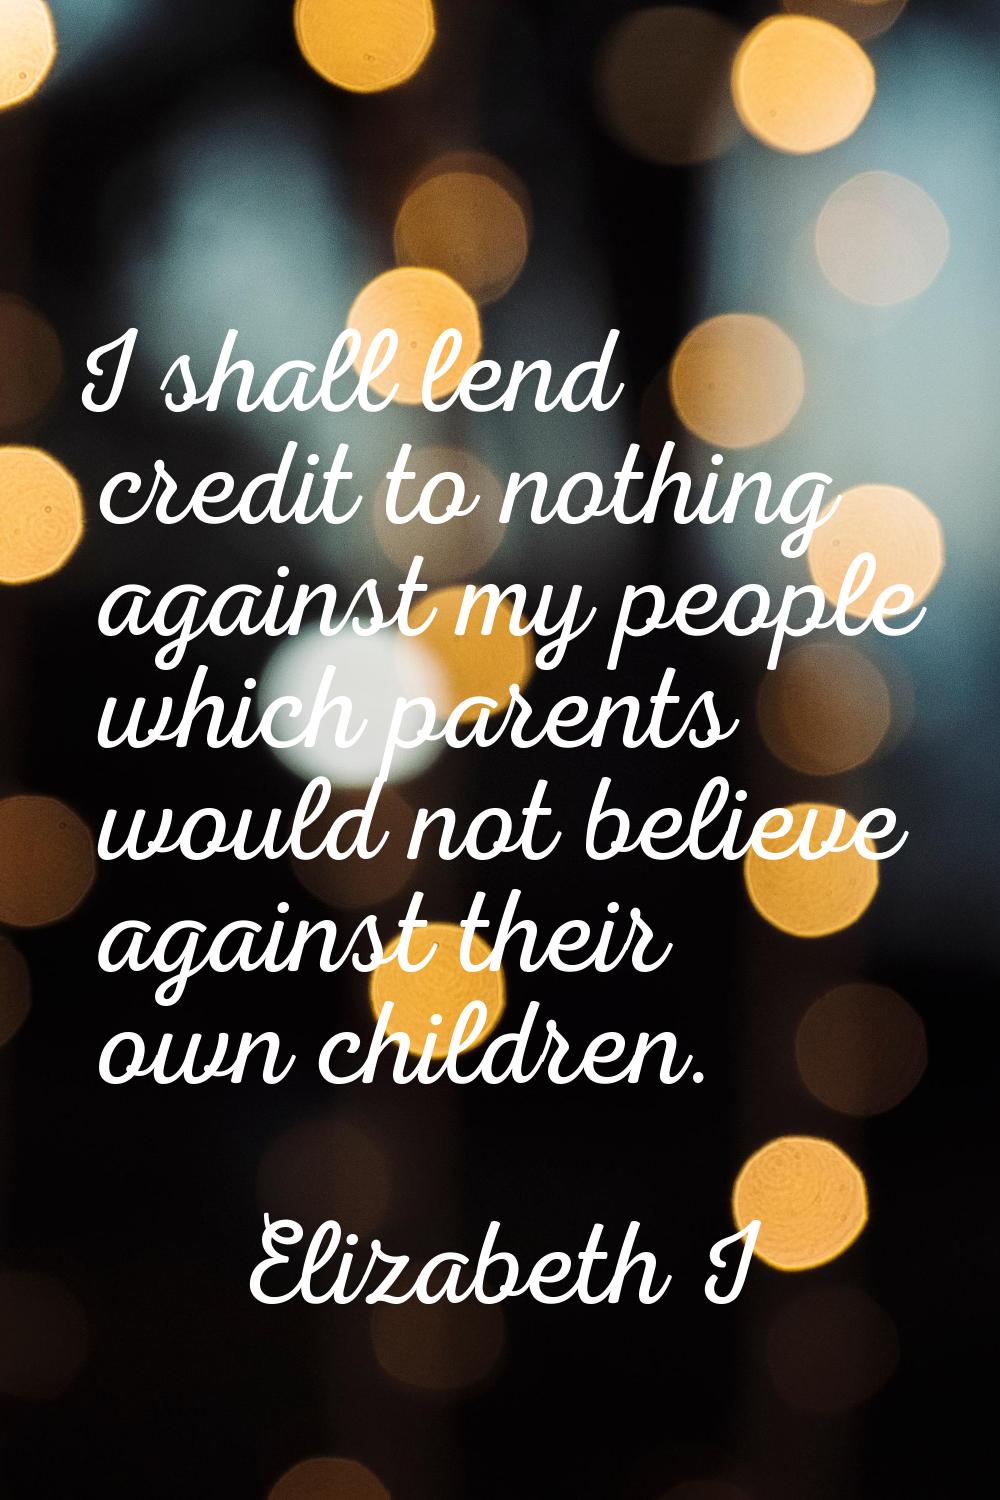 I shall lend credit to nothing against my people which parents would not believe against their own 